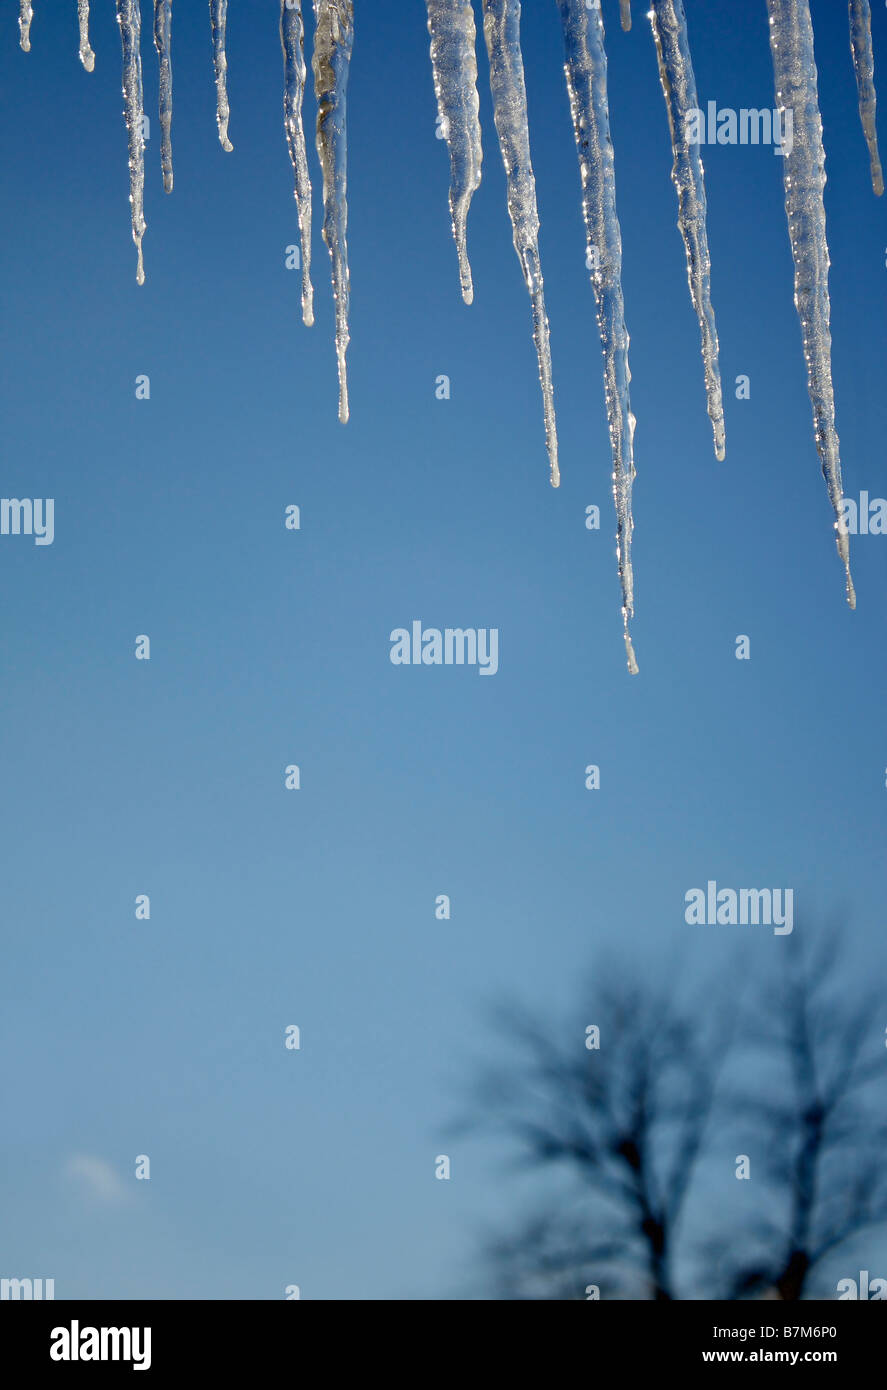 Hanging icicles on  the gutter on house blurred blurry blur background blue sky winter frozen landscape minimalism minimalist artistic minimal hi-res Stock Photo